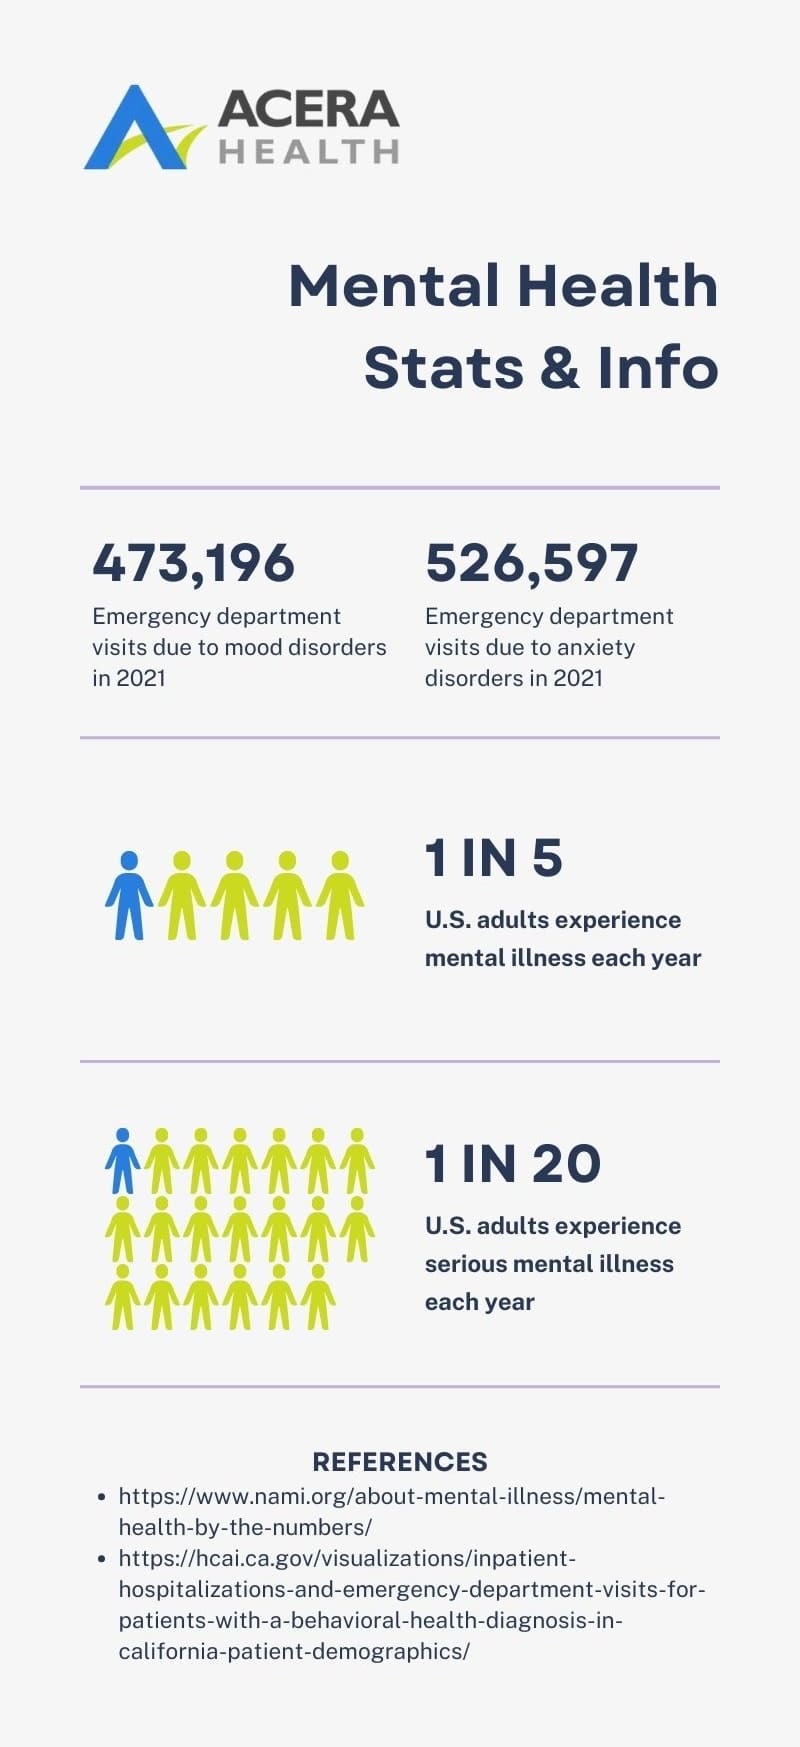 Acera Health logo at the top, followed by the title 'Mental Health Stats & Info'. Below the title, there are two statistics: '473,196 emergency department visits due to mood disorders in 2021' and '526,597 emergency department visits due to anxiety disorders in 2021'. The next section shows that '1 in 5 U.S. adults experience mental illness each year' with a visual of 5 figures, one in blue. The following section states '1 in 20 U.S. adults experience serious mental illness each year' with a visual of 20 figures, one in blue. At the bottom, there is a references section listing two URLs for further information.